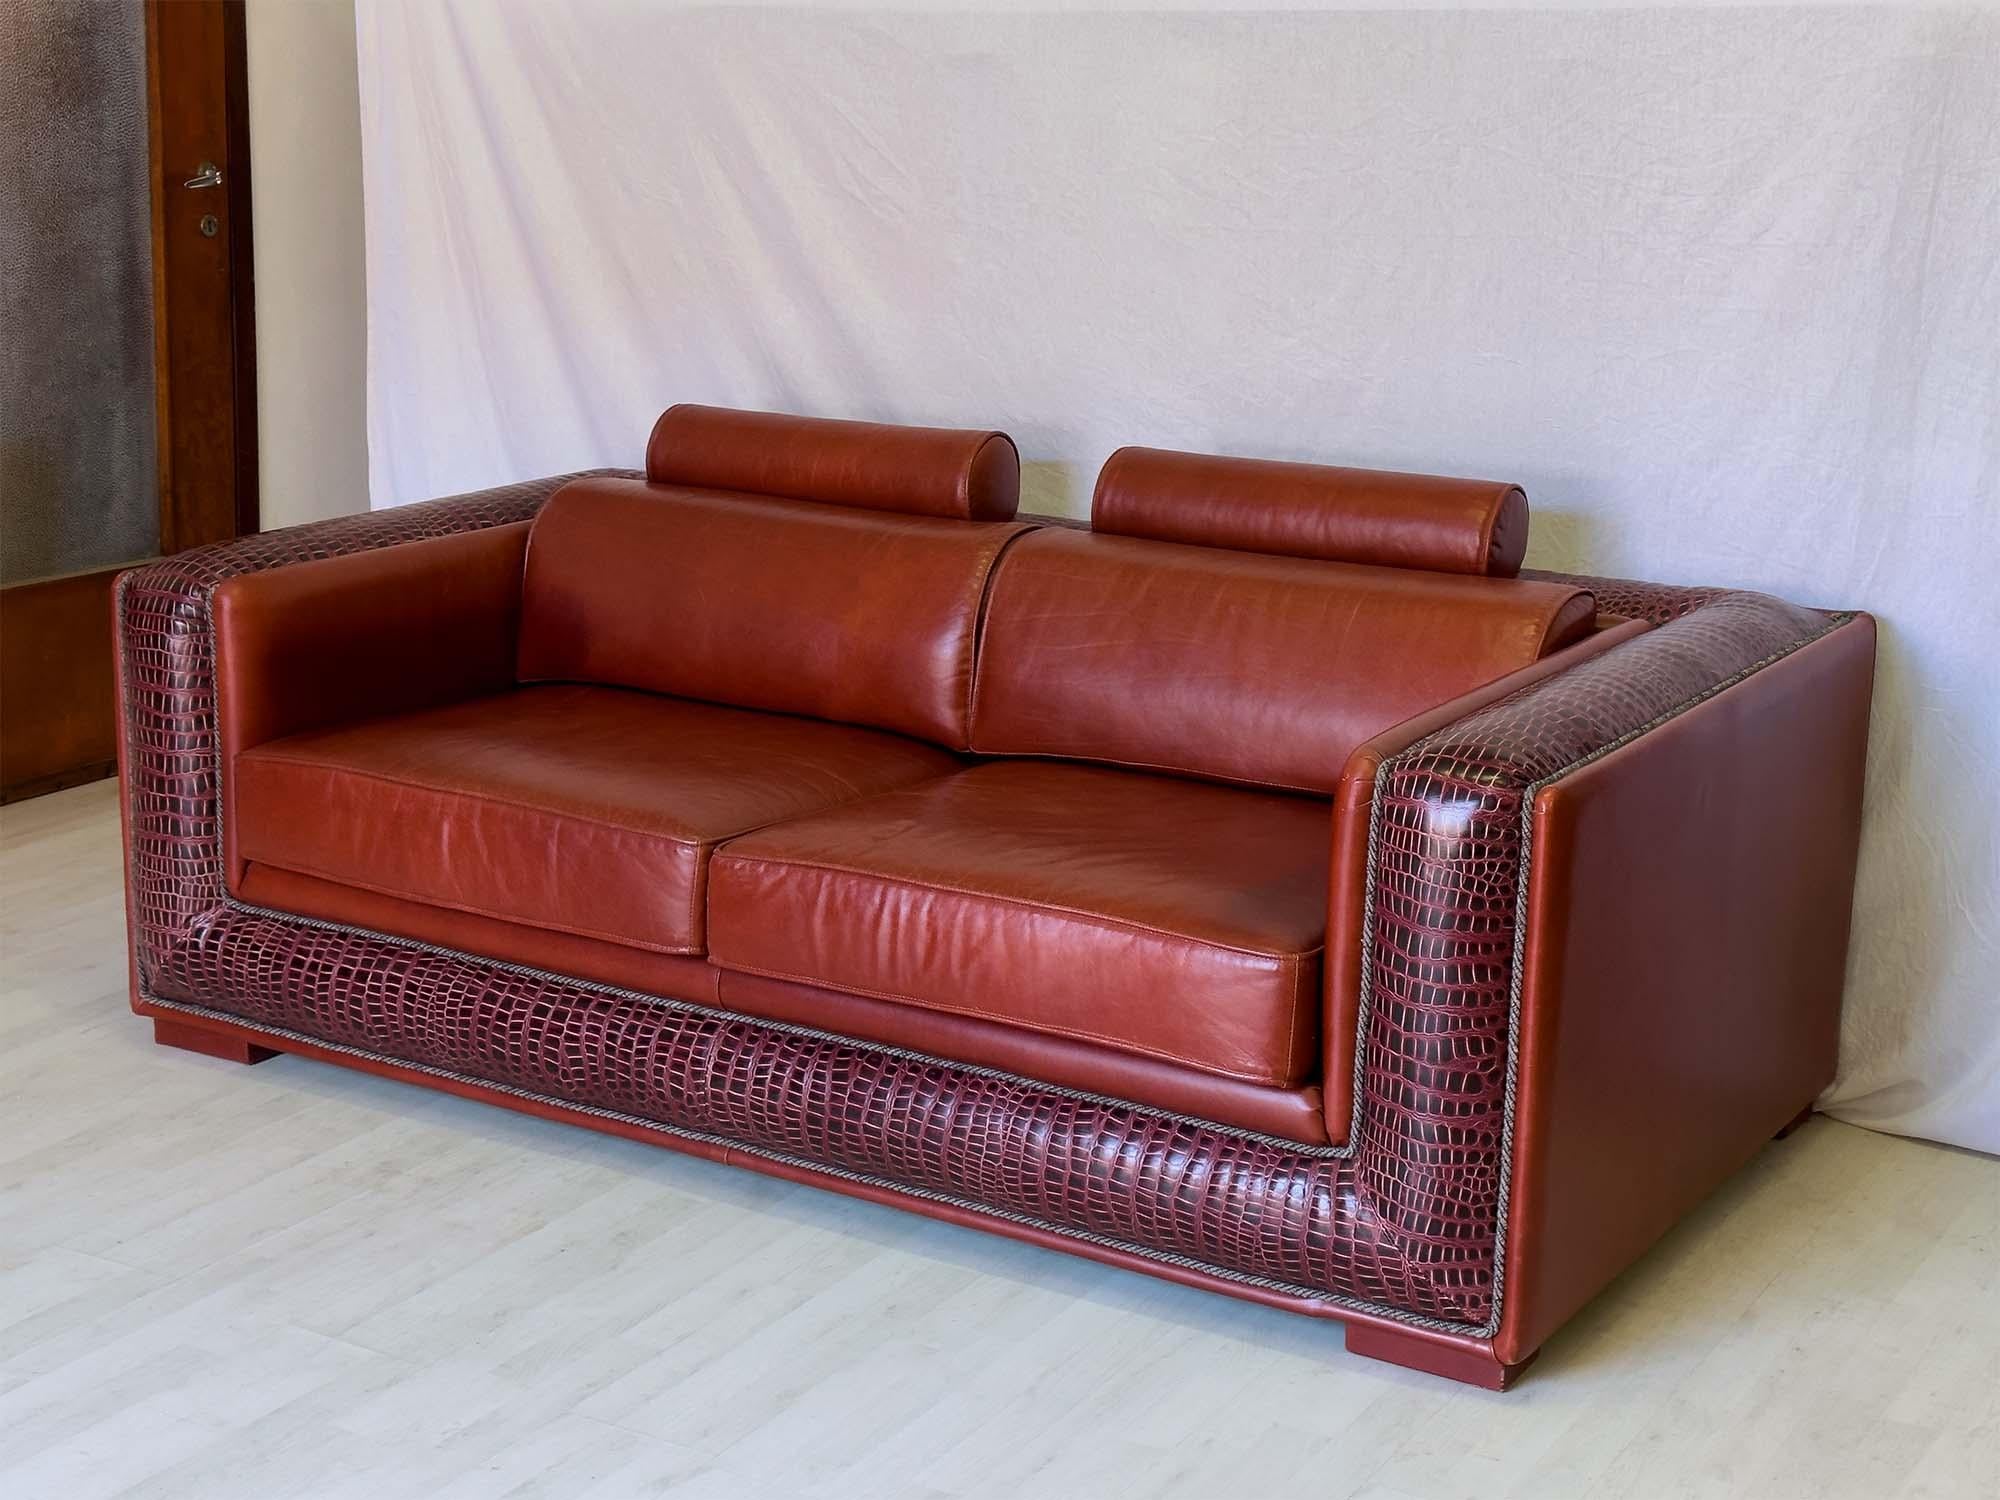 This is a luxurious Italian sofa 3-seater completely handmade in Italy.
It’s a seating of modern classicism designed in order to live in one’s sitting-room with comfort and elegance.
The top quality leather covering the seats as well the frame made